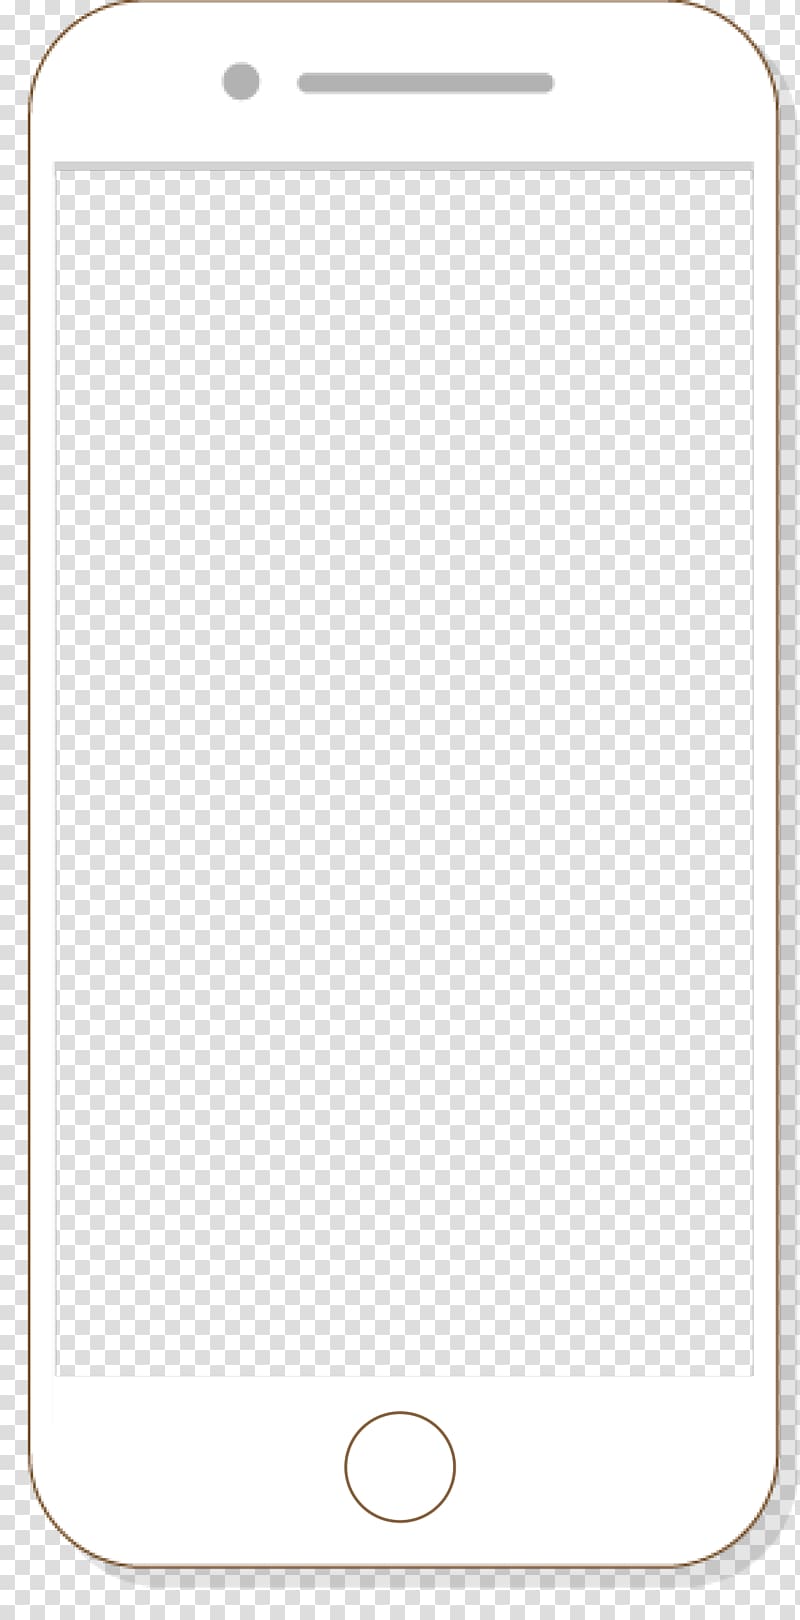 Xiaomi Redmi Note 4 Xiaomi Redmi Note 5A Xiaomi Redmi 4X, smartphone transparent background PNG clipart